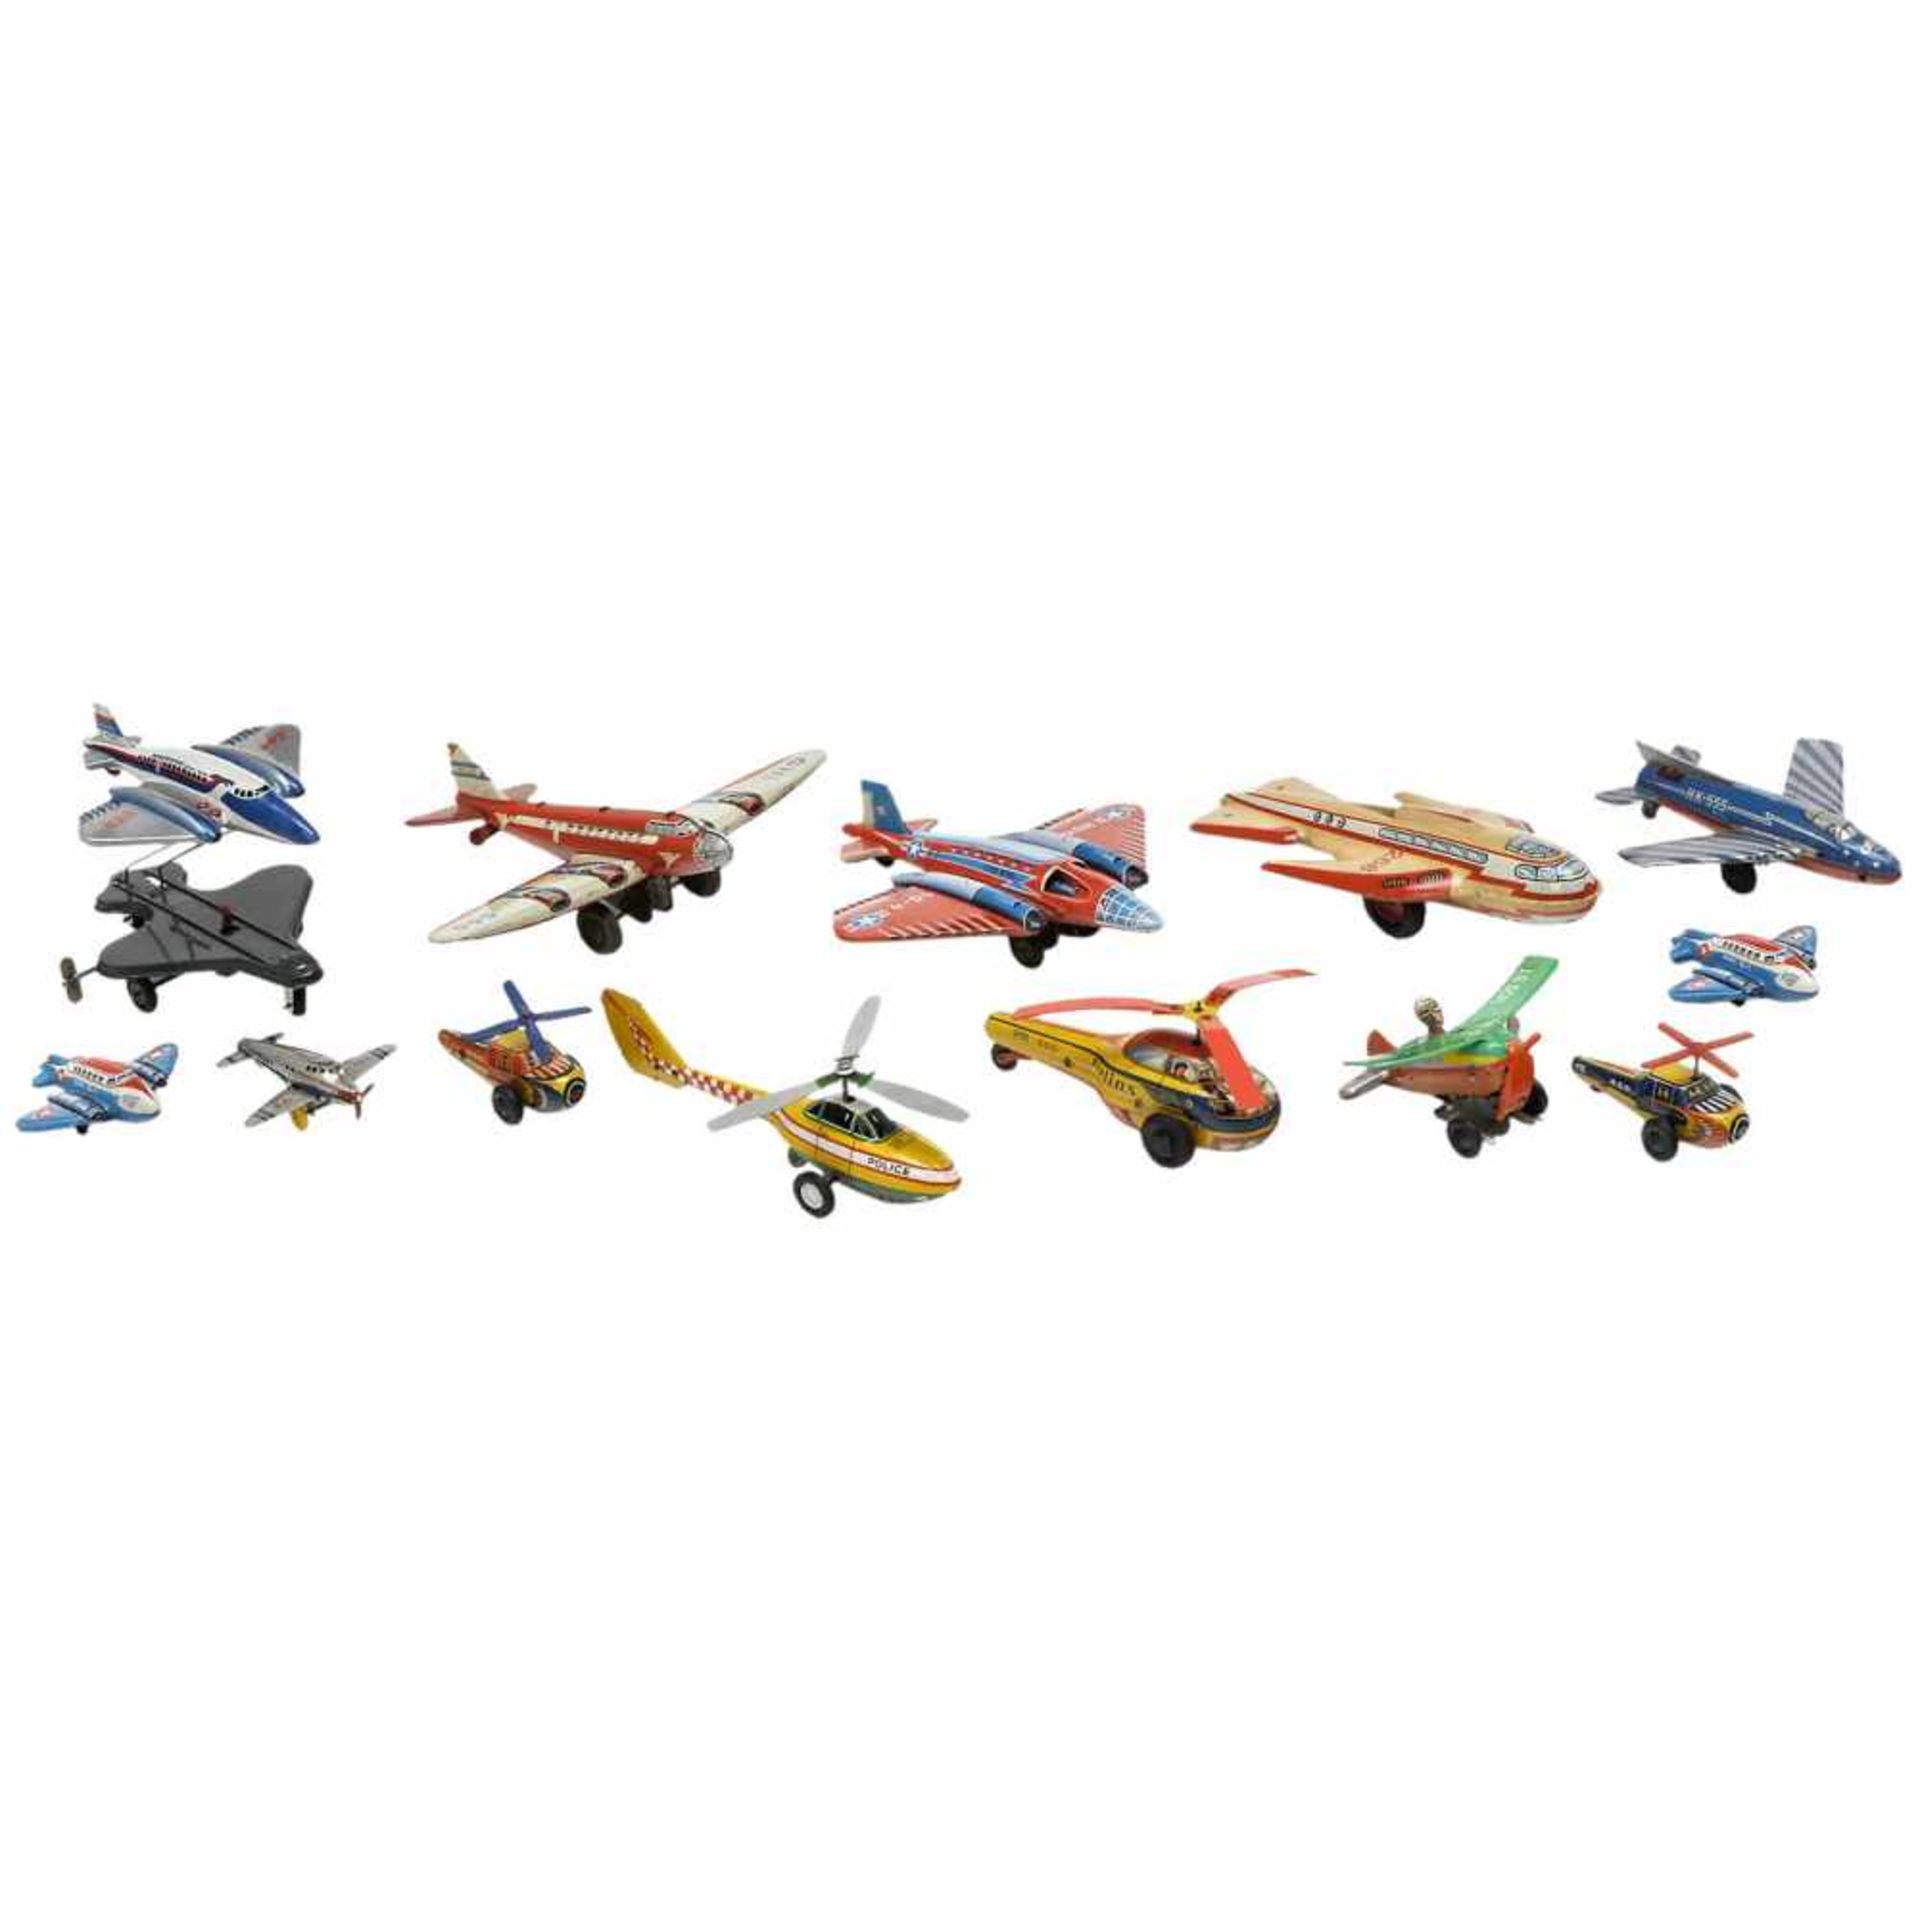 13 Toy Airplanes and Helicopters, c. 1955Made by Technofix, Huki, B&S and Hammerer & Kühlwein,